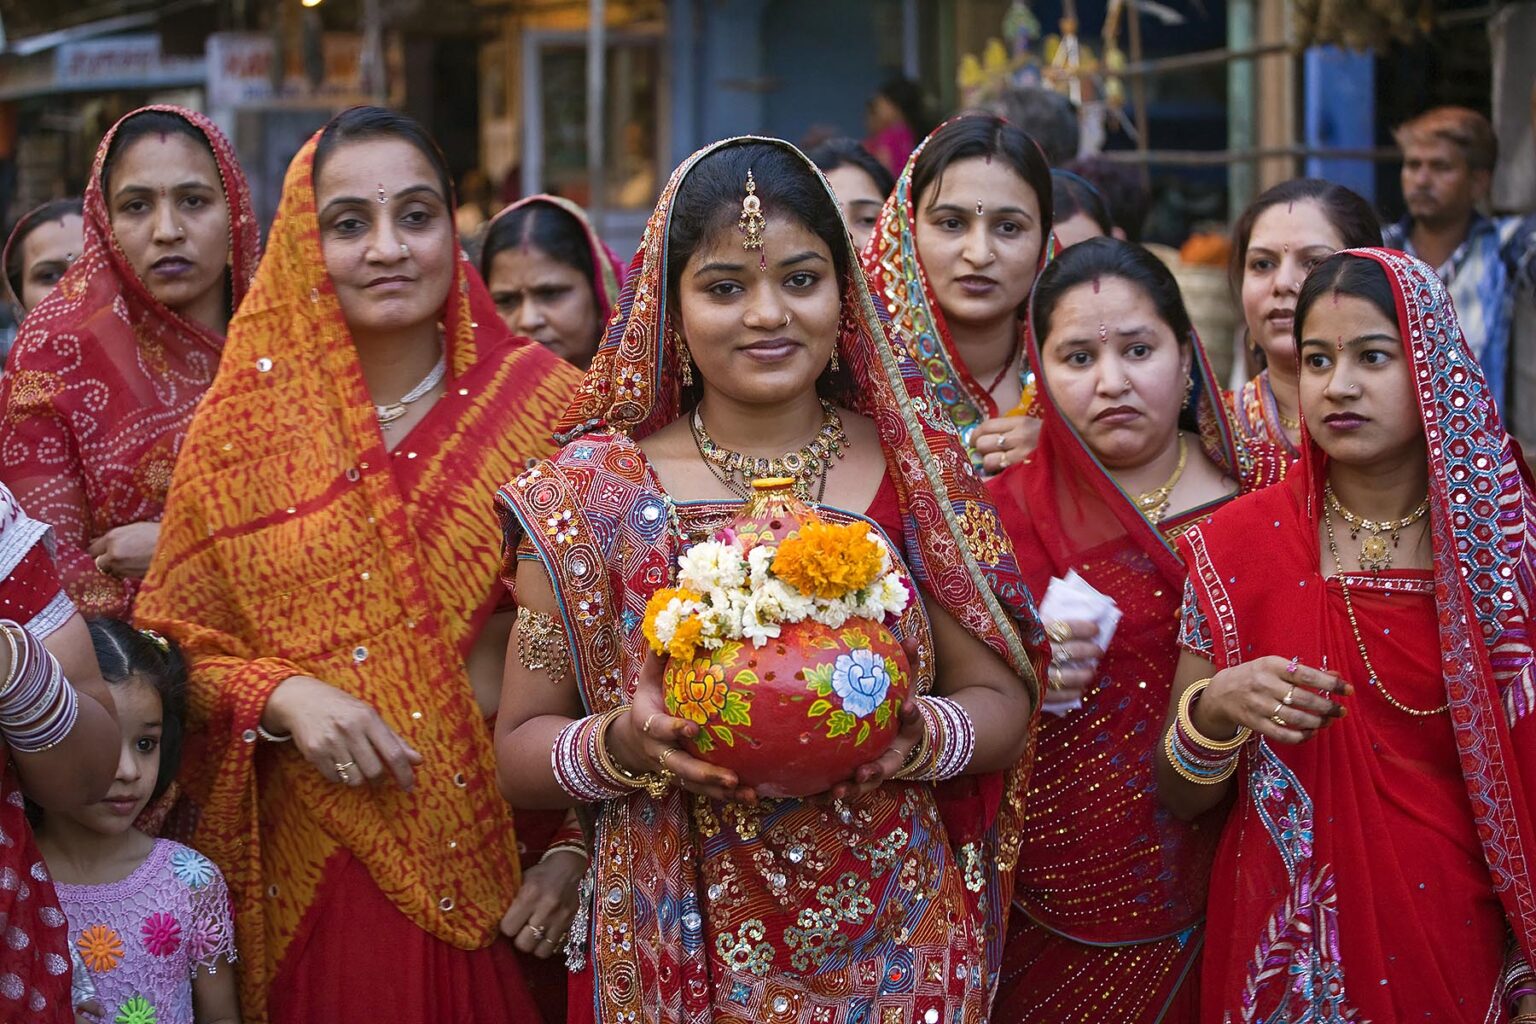 Rajasthani women carry a clay pot through the city as part of the GANGUR FESTIVAL in JOHDPUR - RAJASTHAN, INDIA